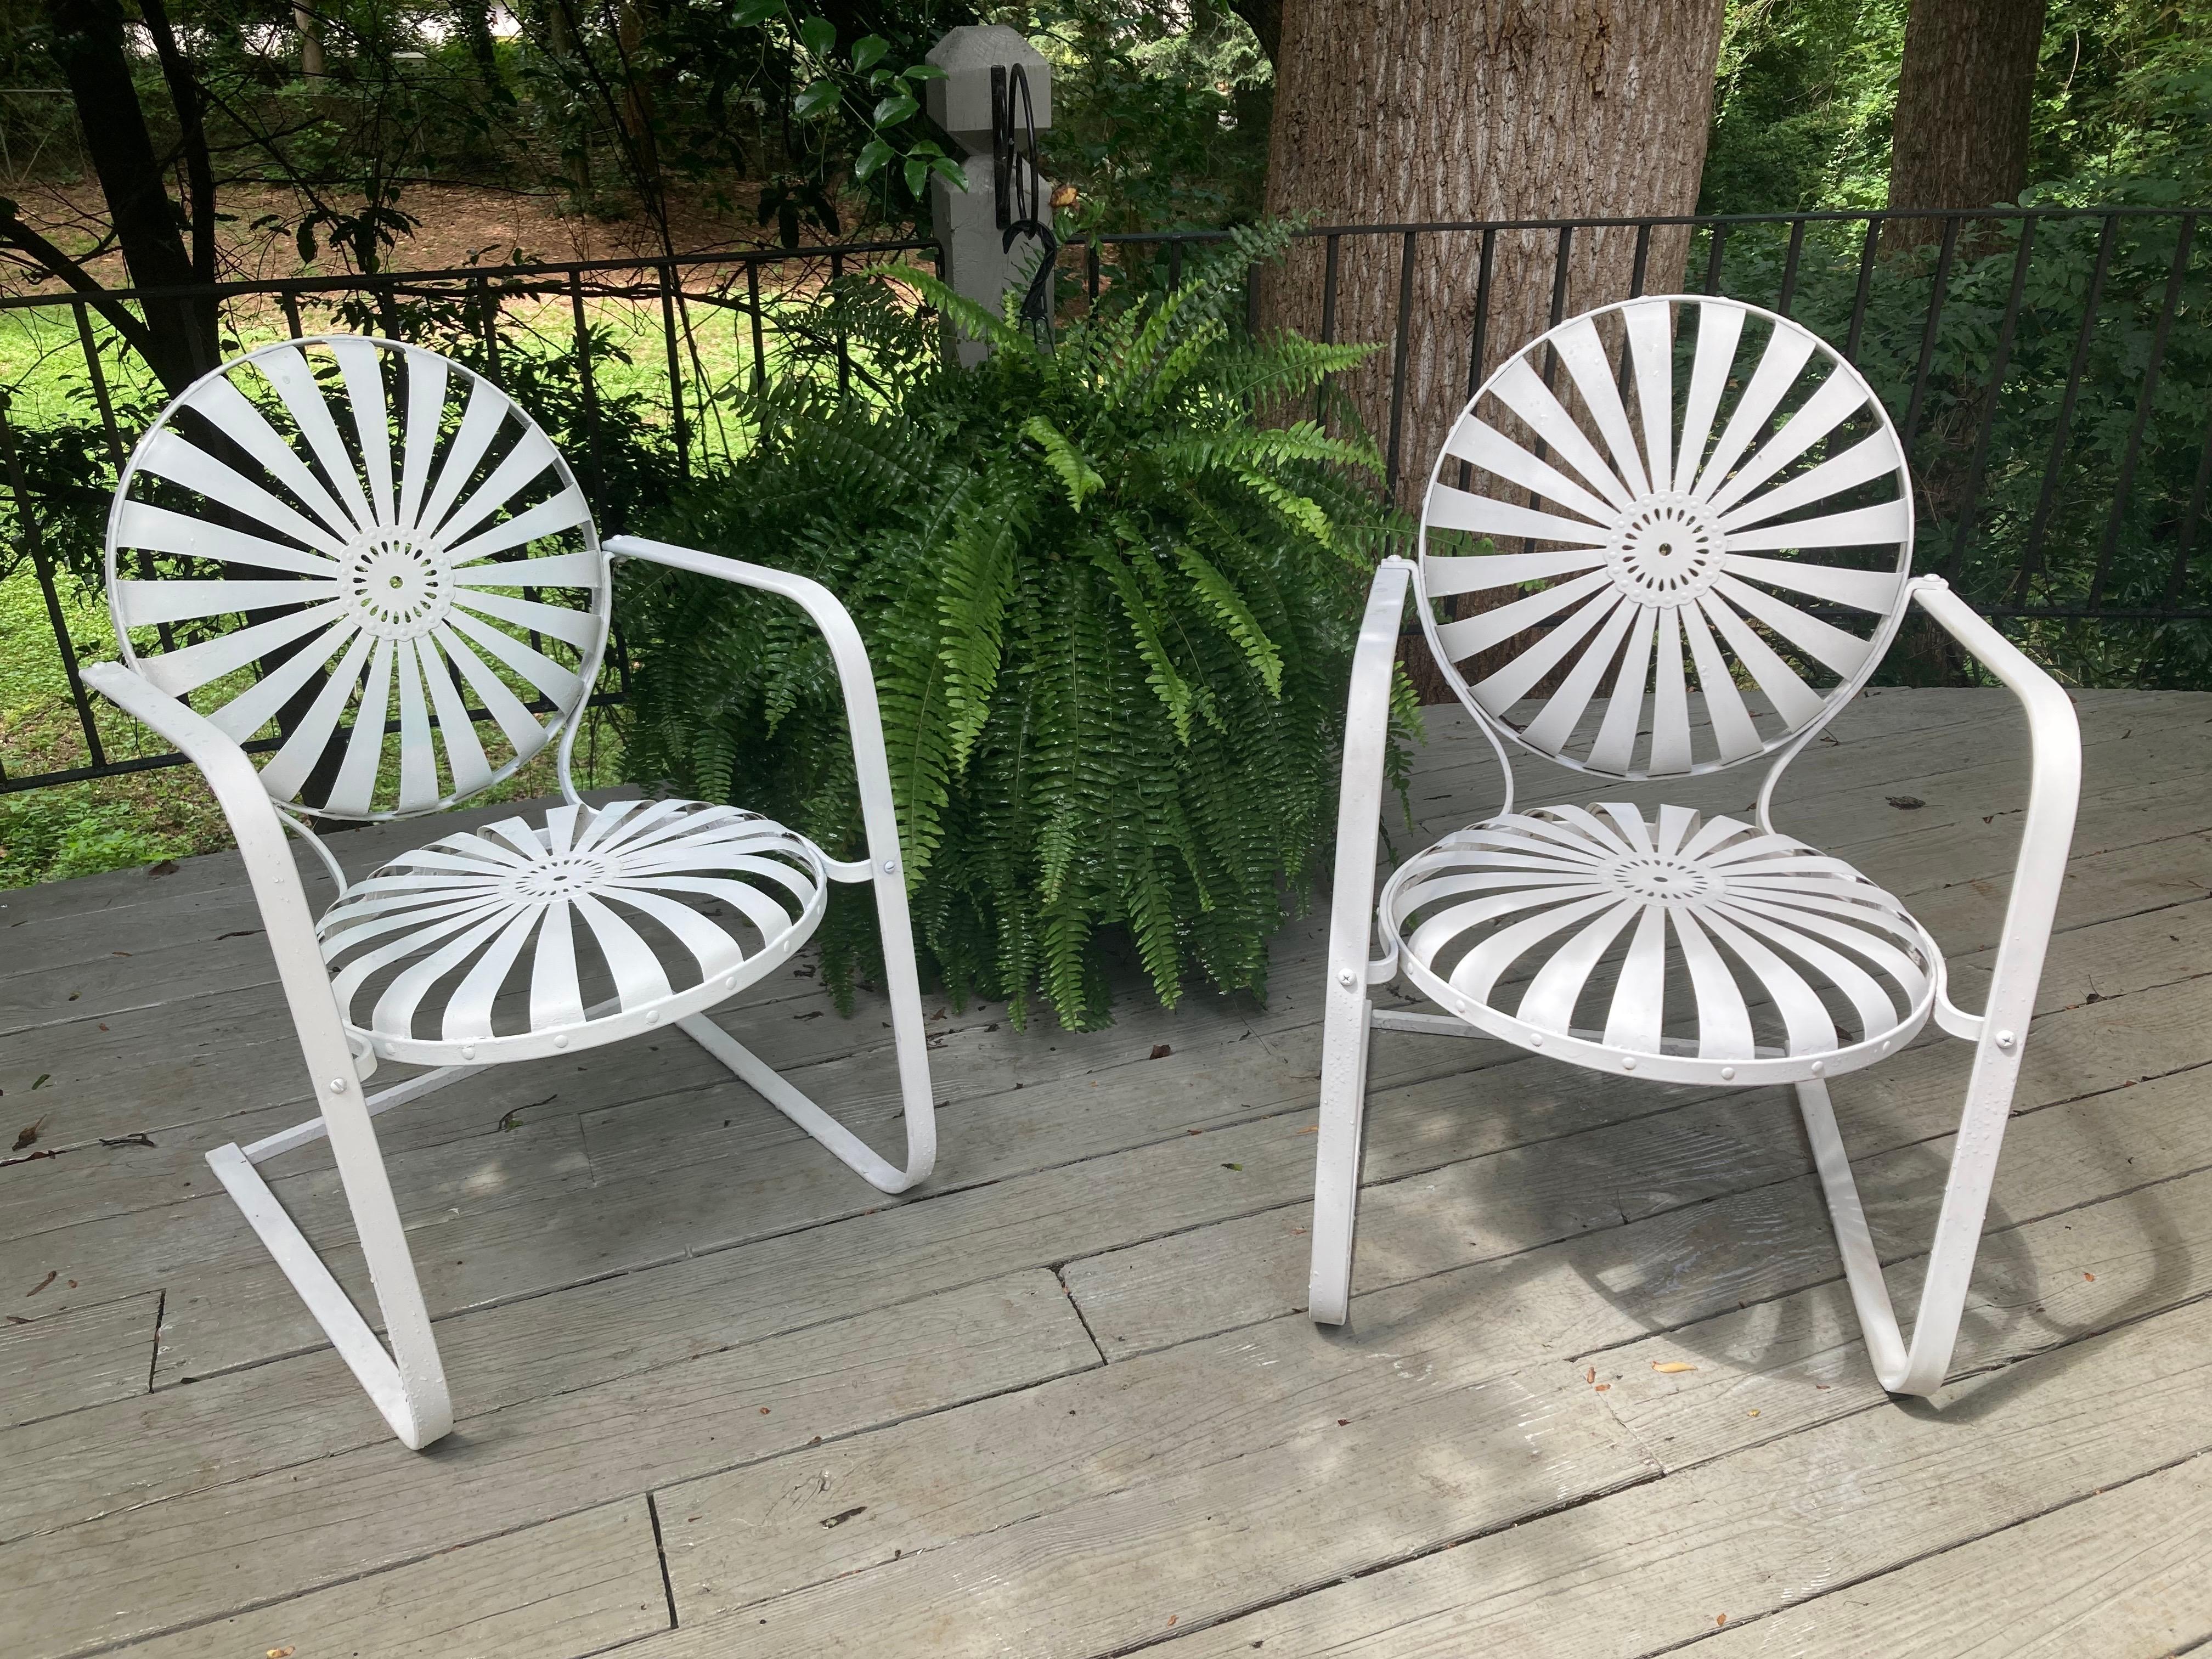 francois carre cantilever garden chairs

c.1930’s French art deco wrought iron & spring steel chairs by Francois Carre.

measure 21 1/4” wide, 34” tall, with a 17” seat height of and a depth of 25”.


****garden chair with rocking cantilevered bases